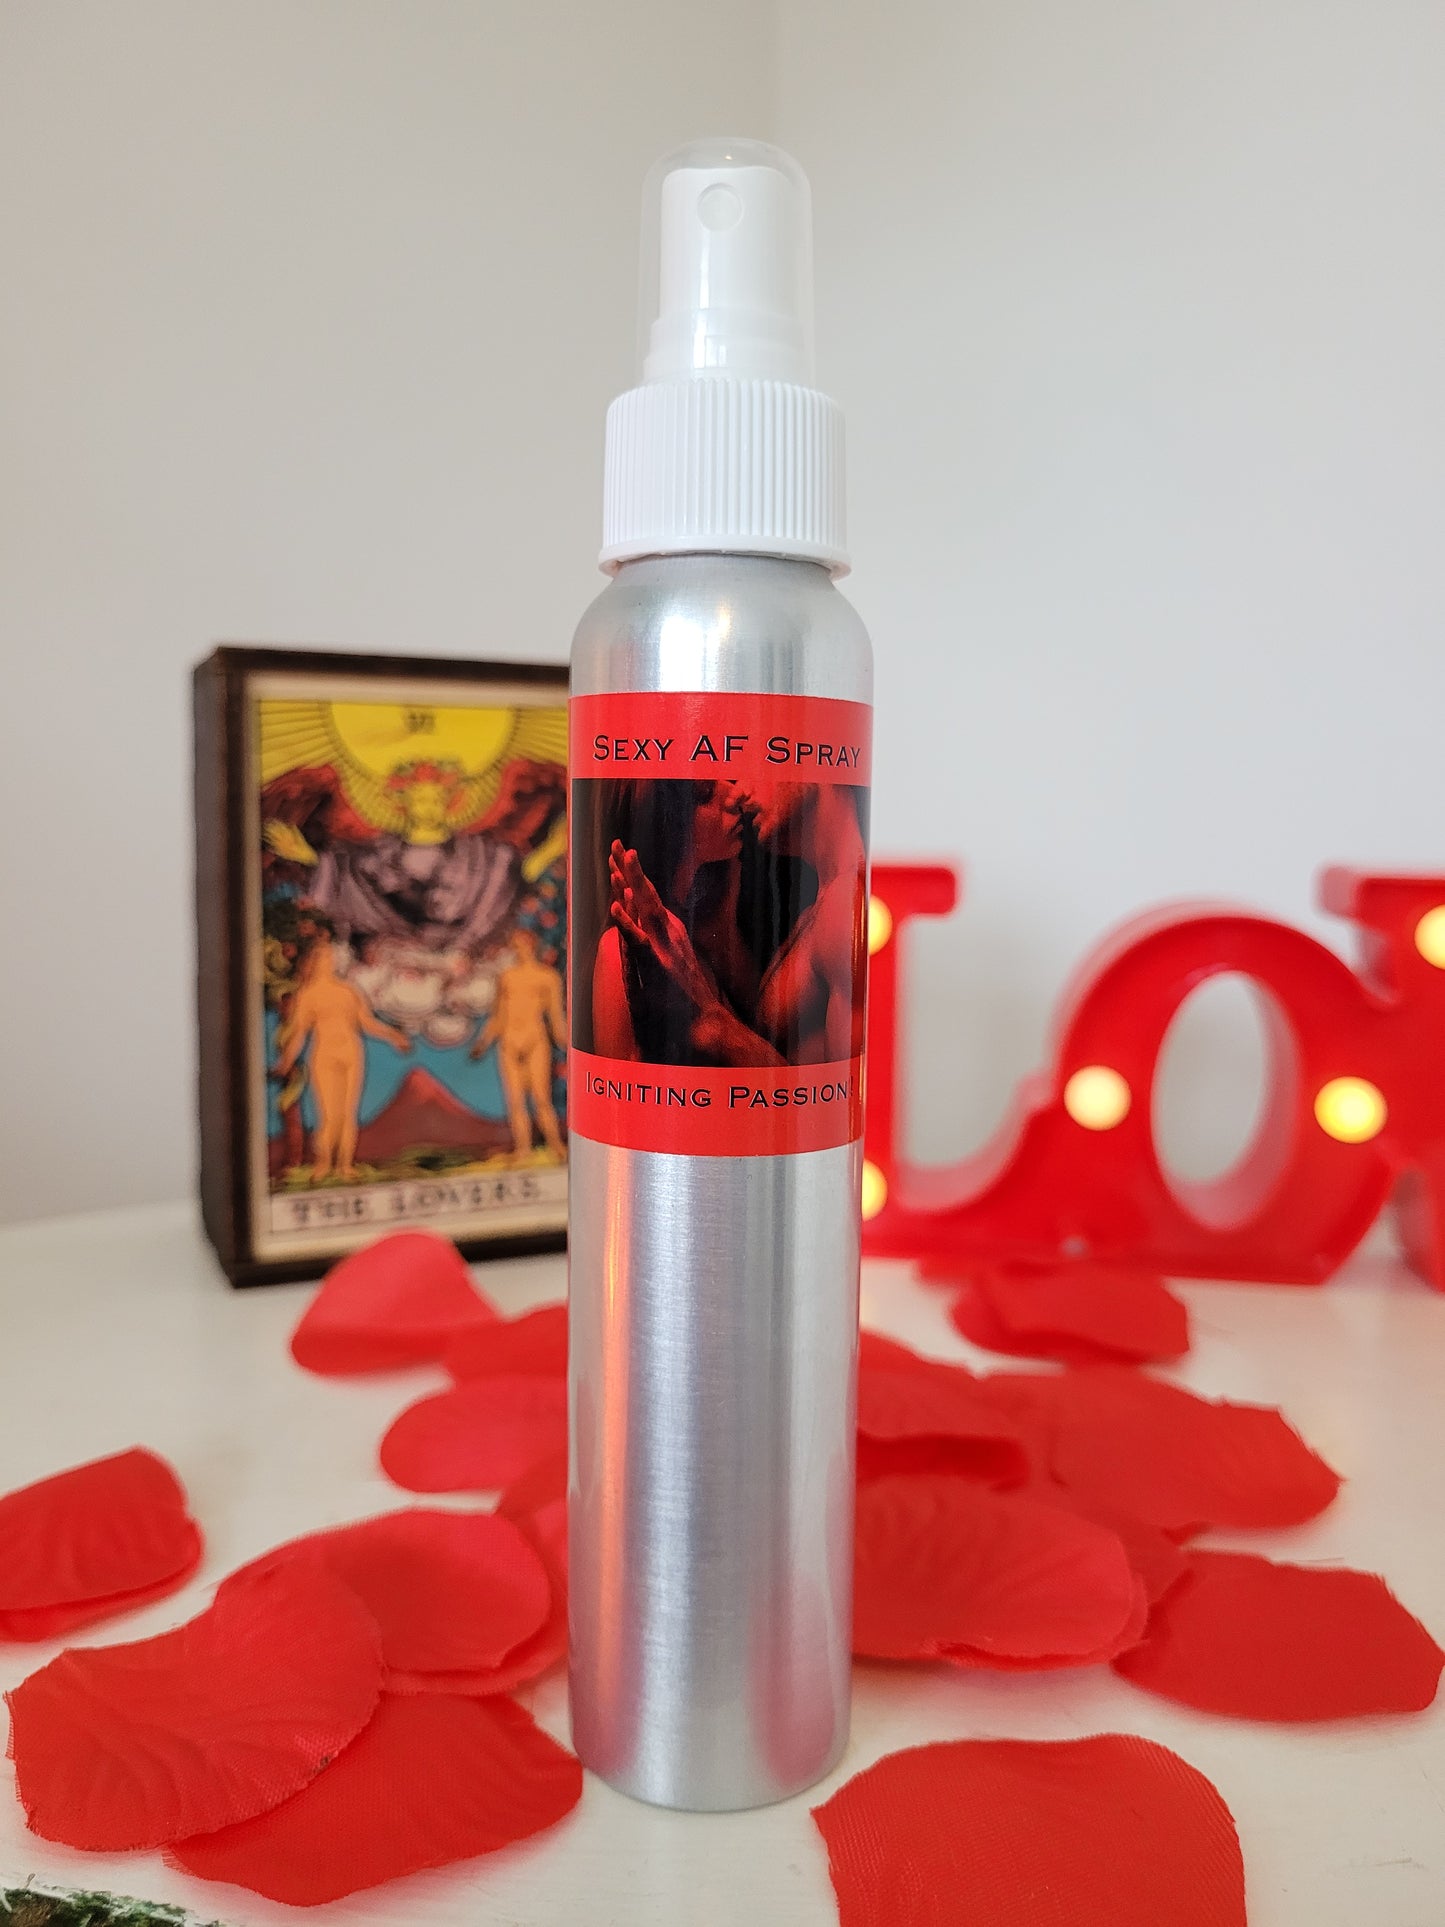 Sexy AF Spray - Igniting Passion